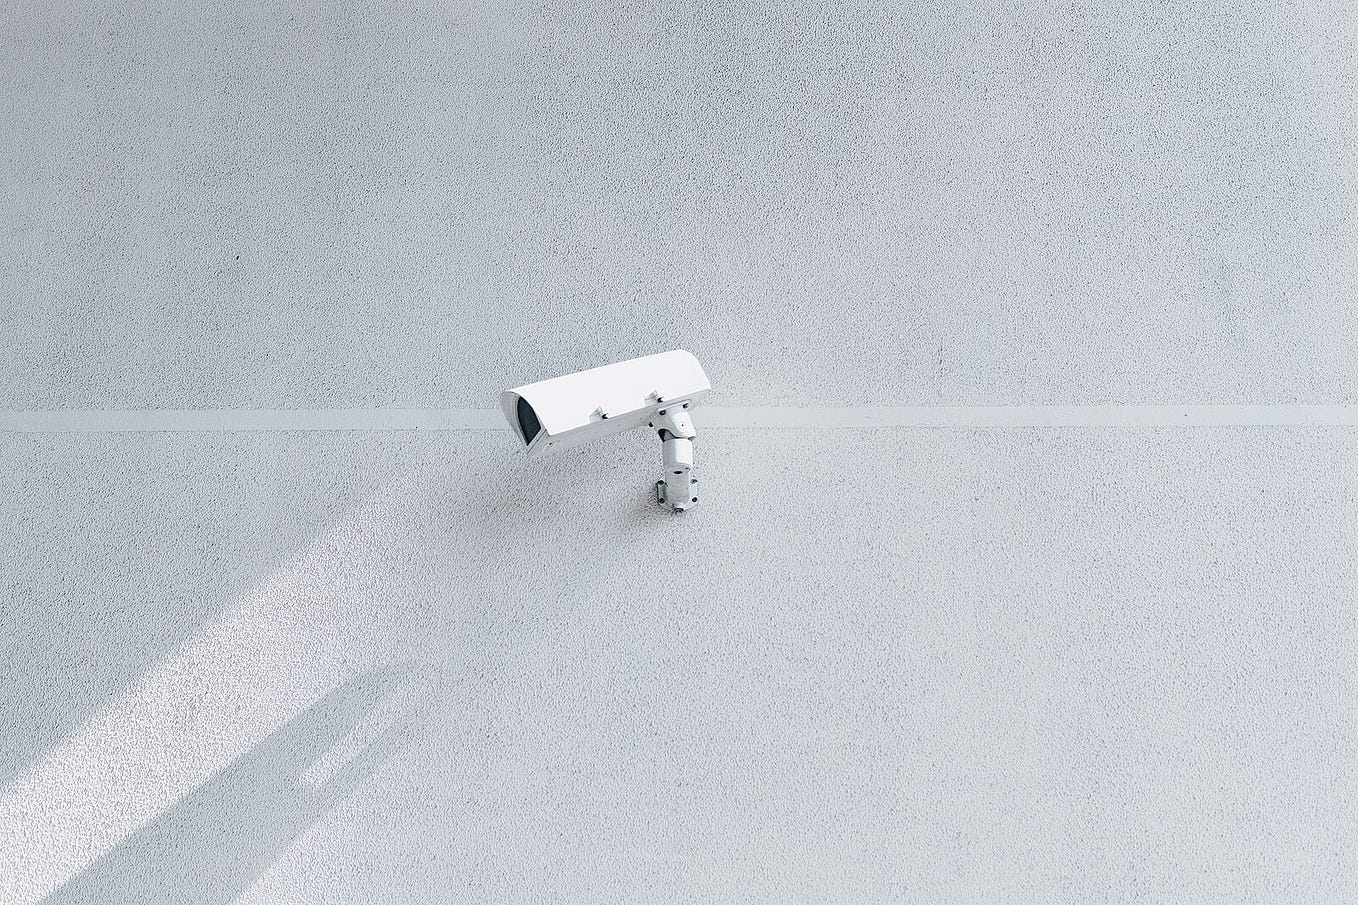 A photograph of a CCTV surveillance camera attached to a blank wall and its shadow